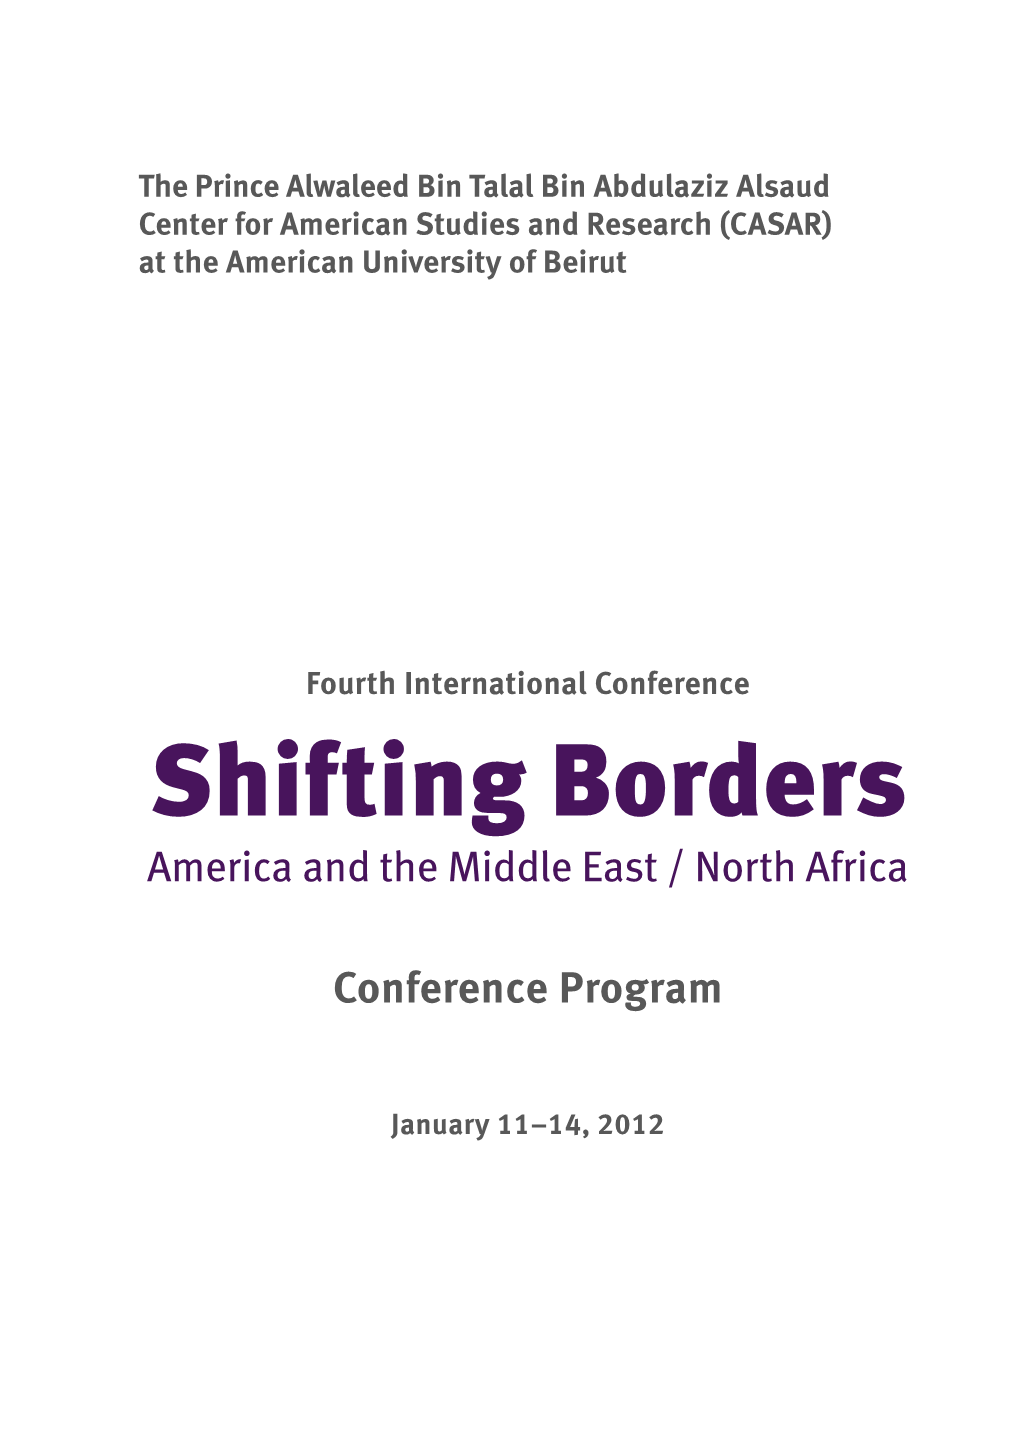 Shifting Borders America and the Middle East / North Africa